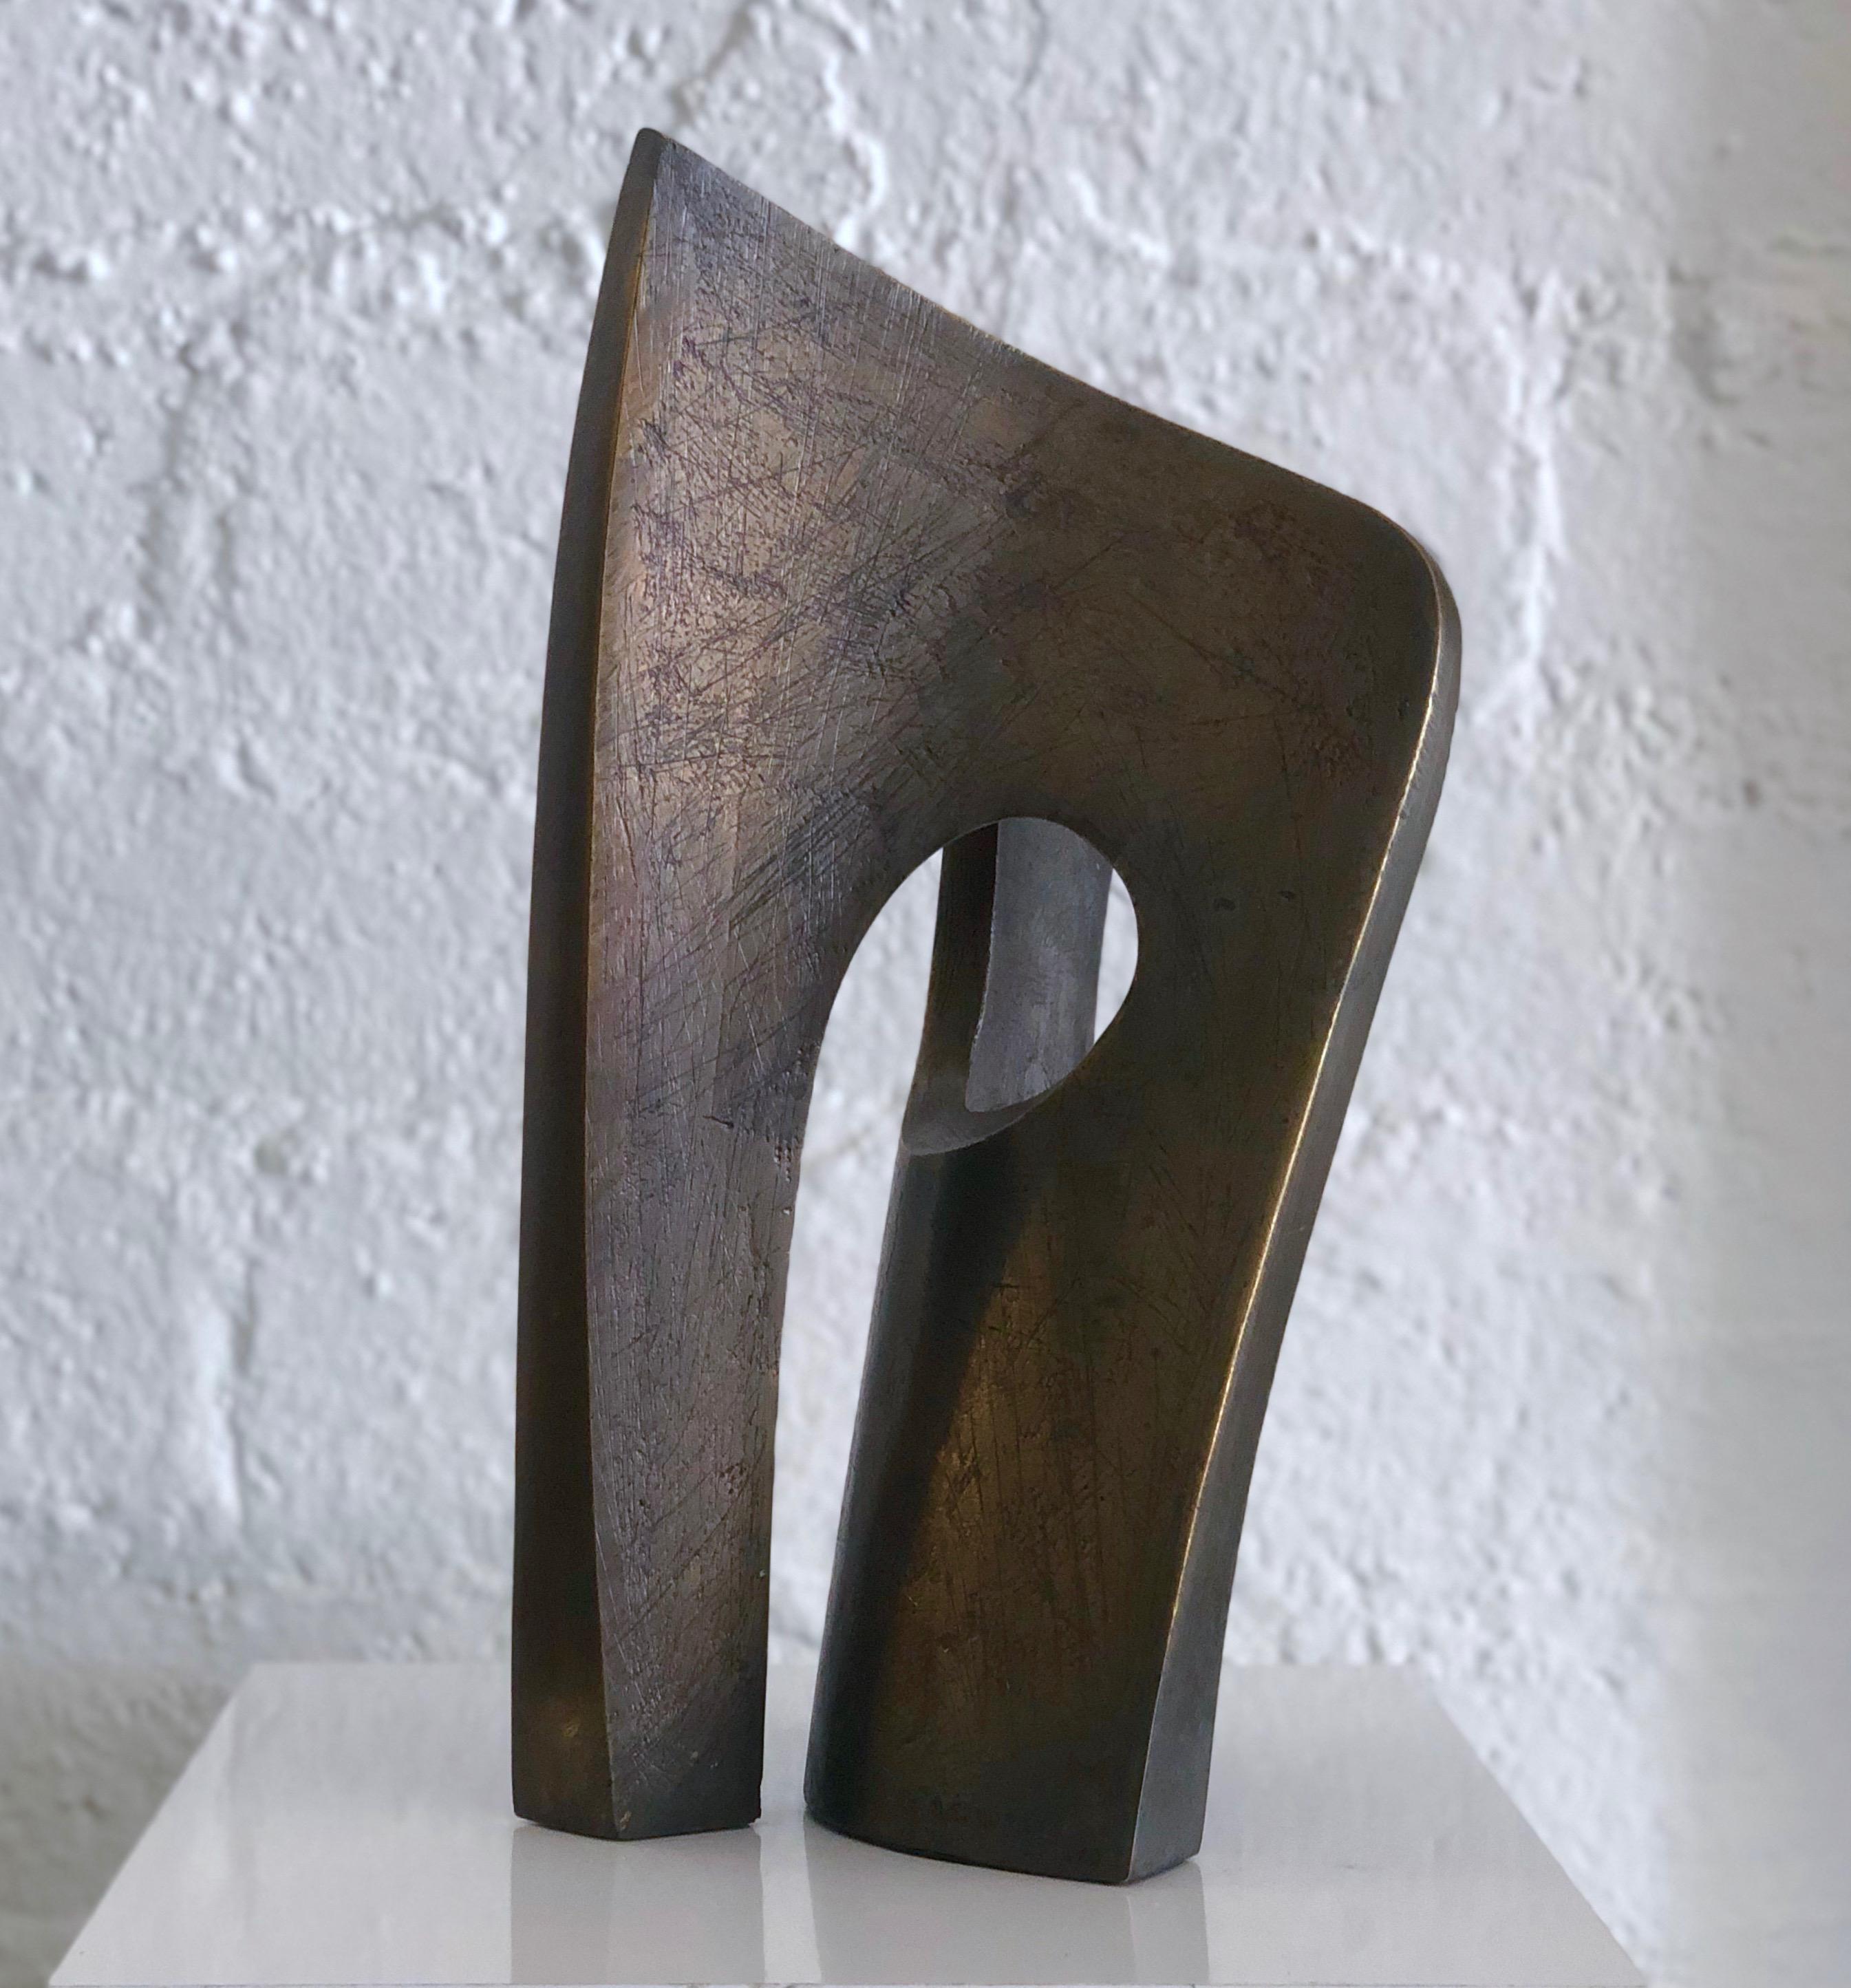 This solid bronze abstract sculpture is signed M.E. Lorenz and dated 1976 and is 1/5.
The bronze has a textured finish and is attractive from all angles.